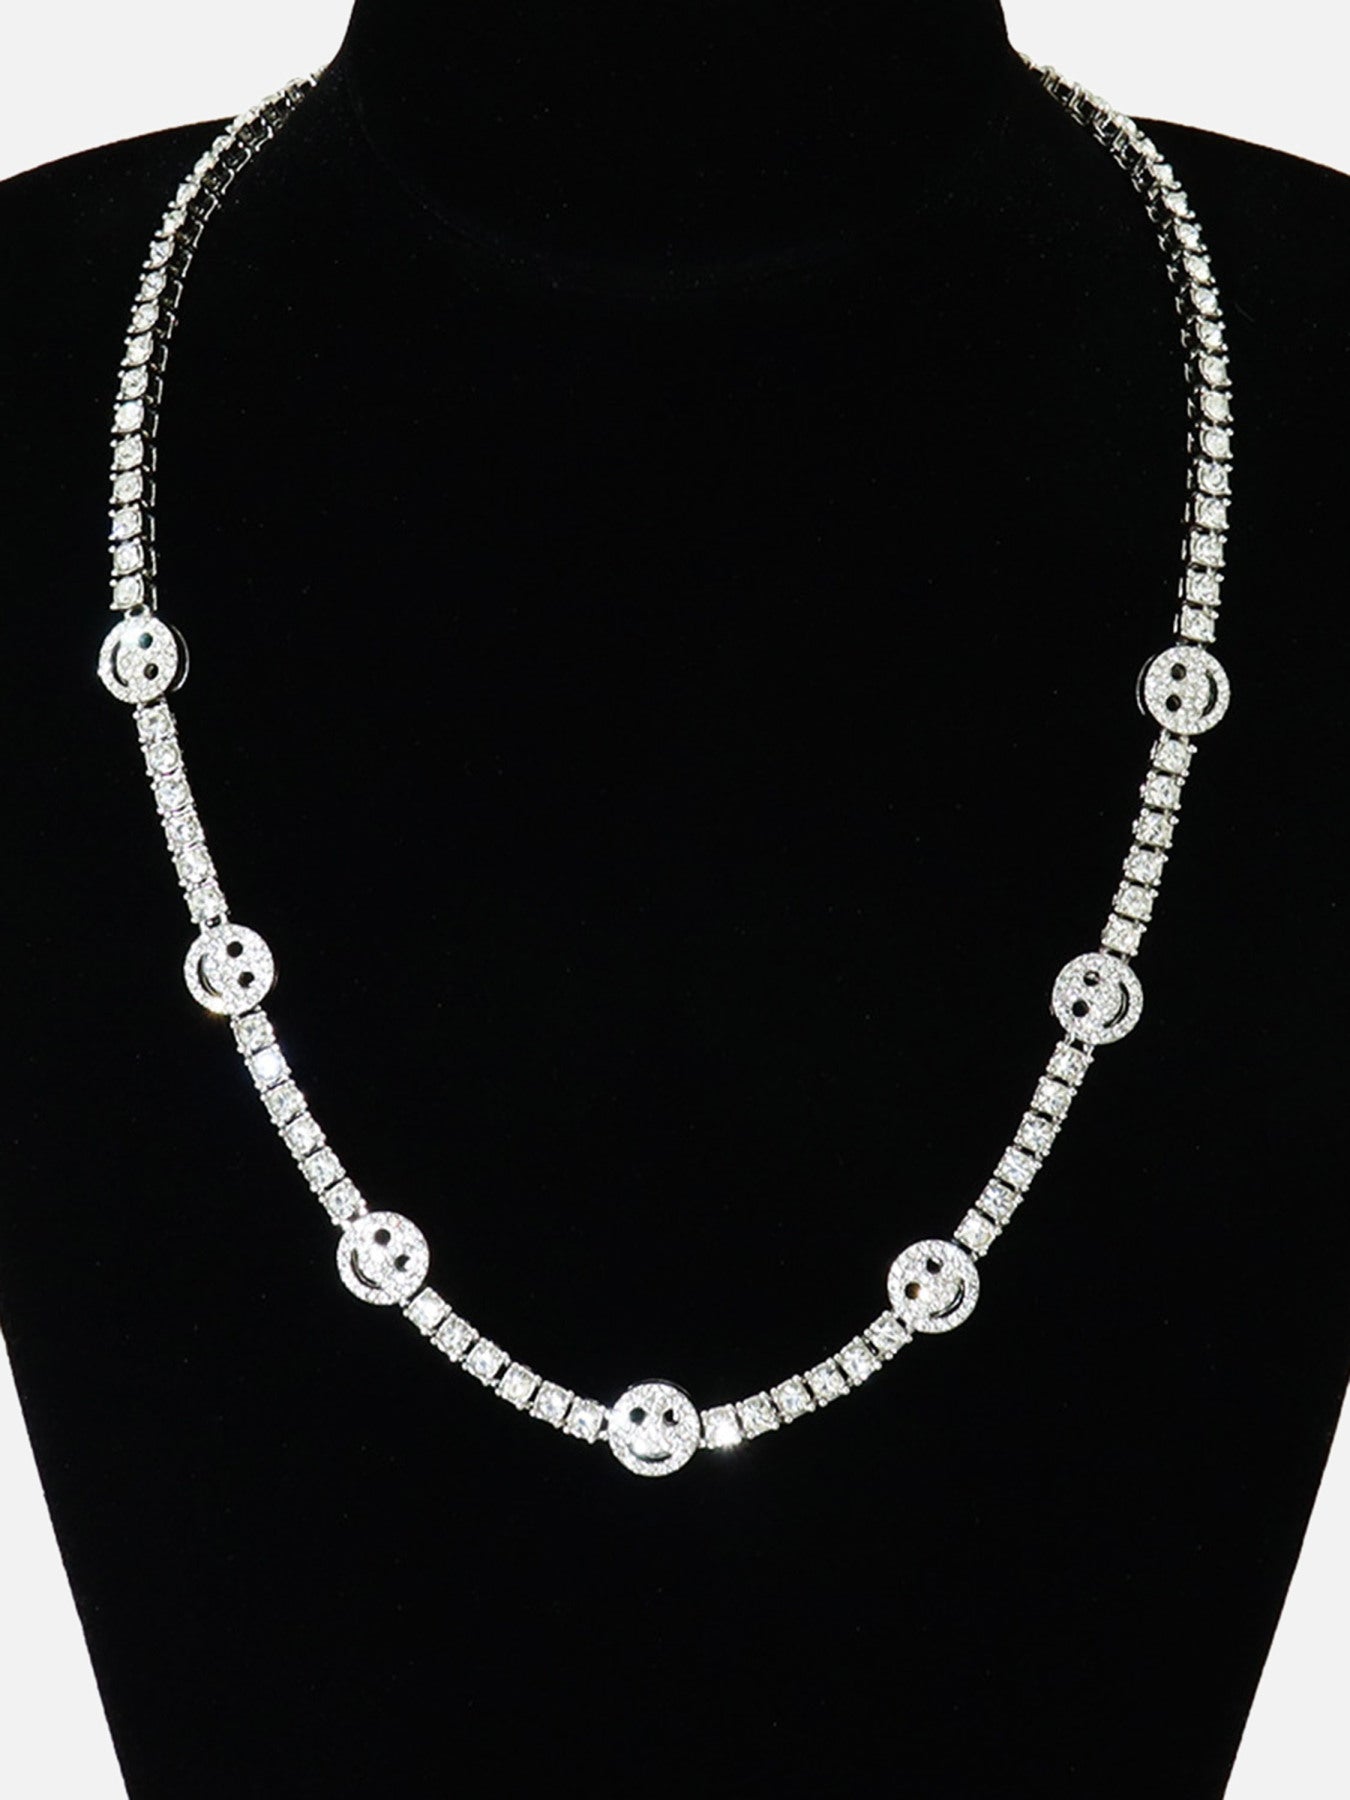 The Supermade Full Diamond Smile Necklace